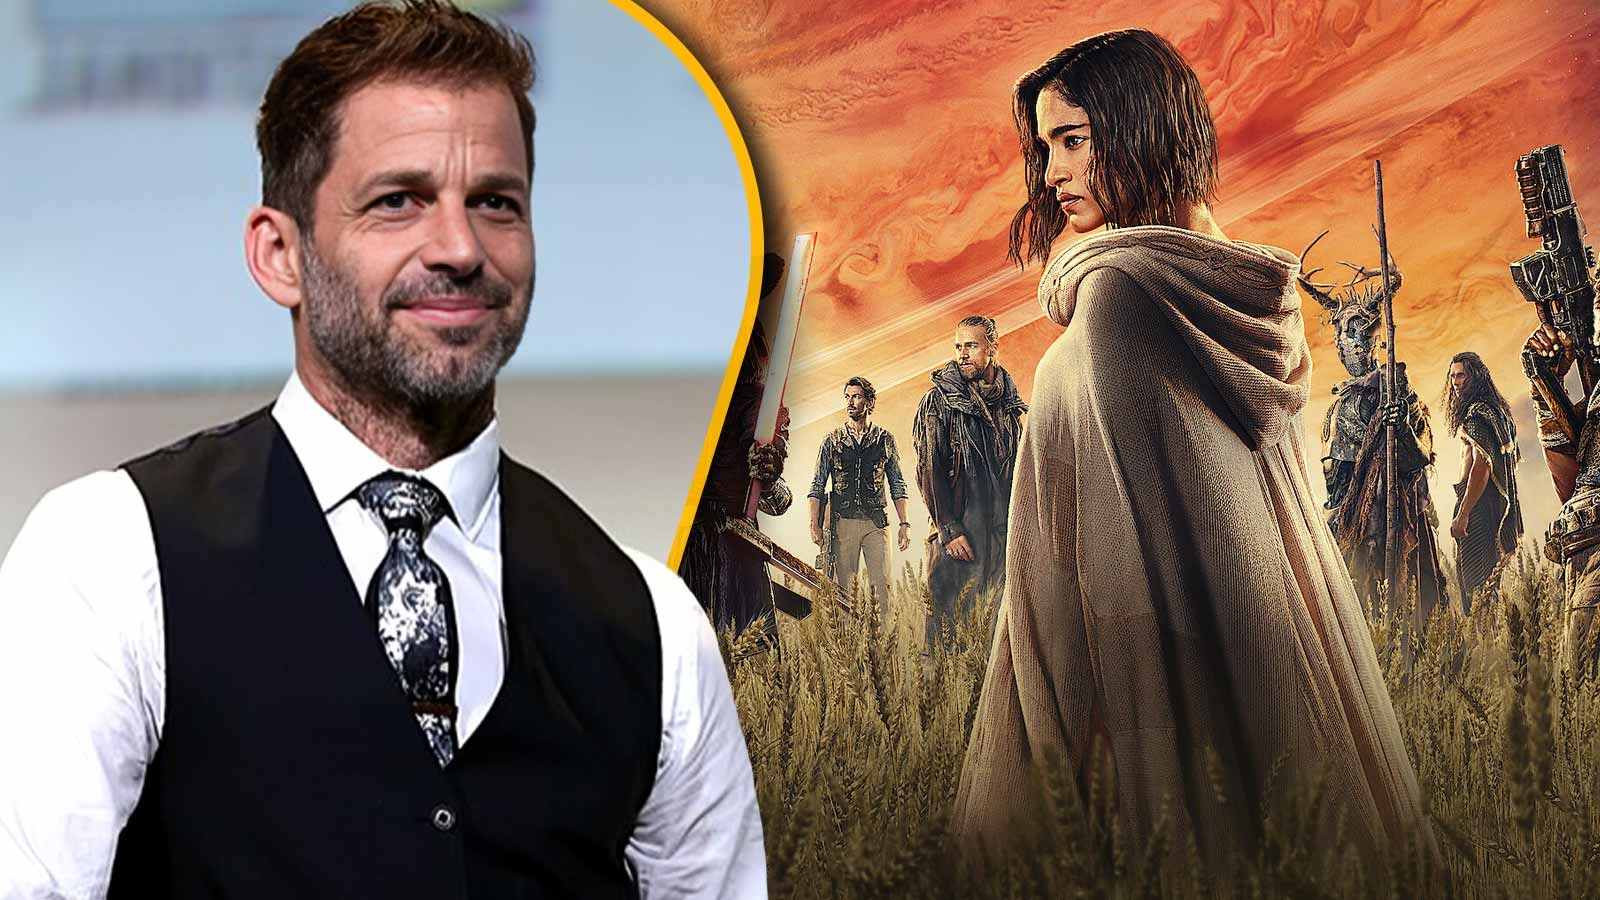 “It’s even worse”: Director’s Cut For Zack Snyder’s Rebel Moon is Not Something Fans Are Eagerly Looking Forward to After Disappointing First 2 Movies